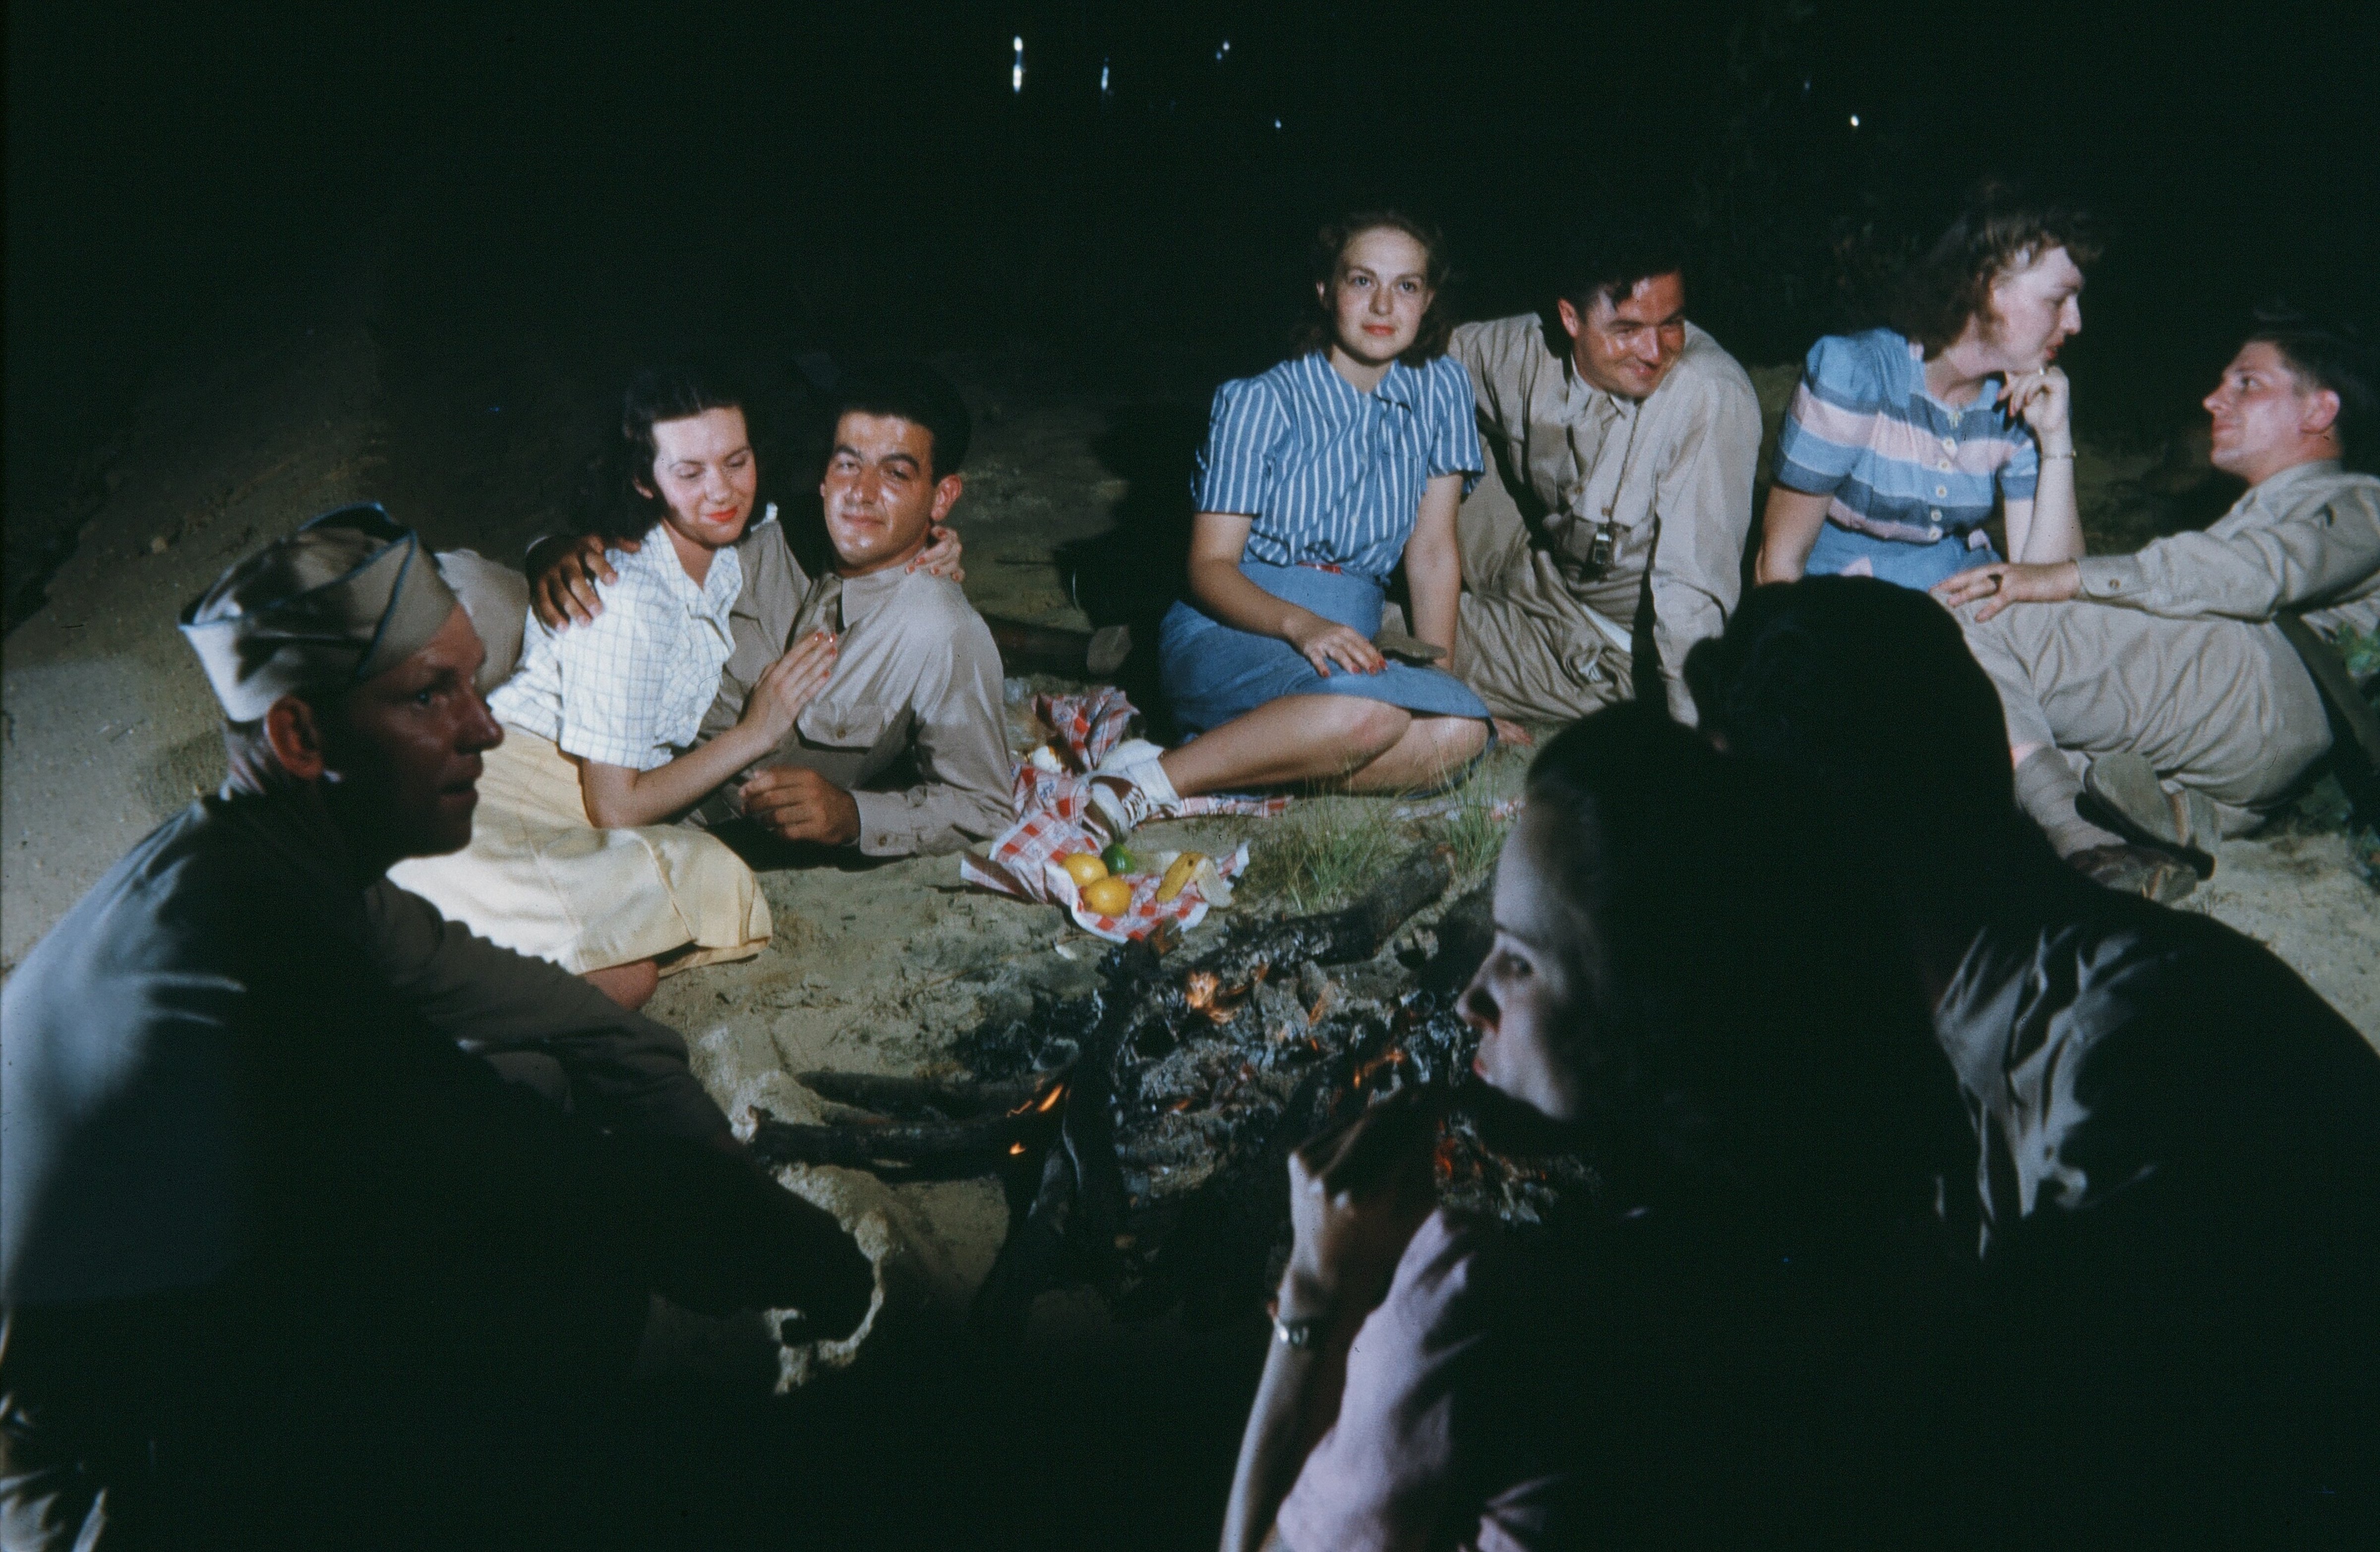 A view of off-duty soldiers socializing at bonfire in Fayetteville, North Carolina in 1942. (Michael Ochs Archives—Getty Images)